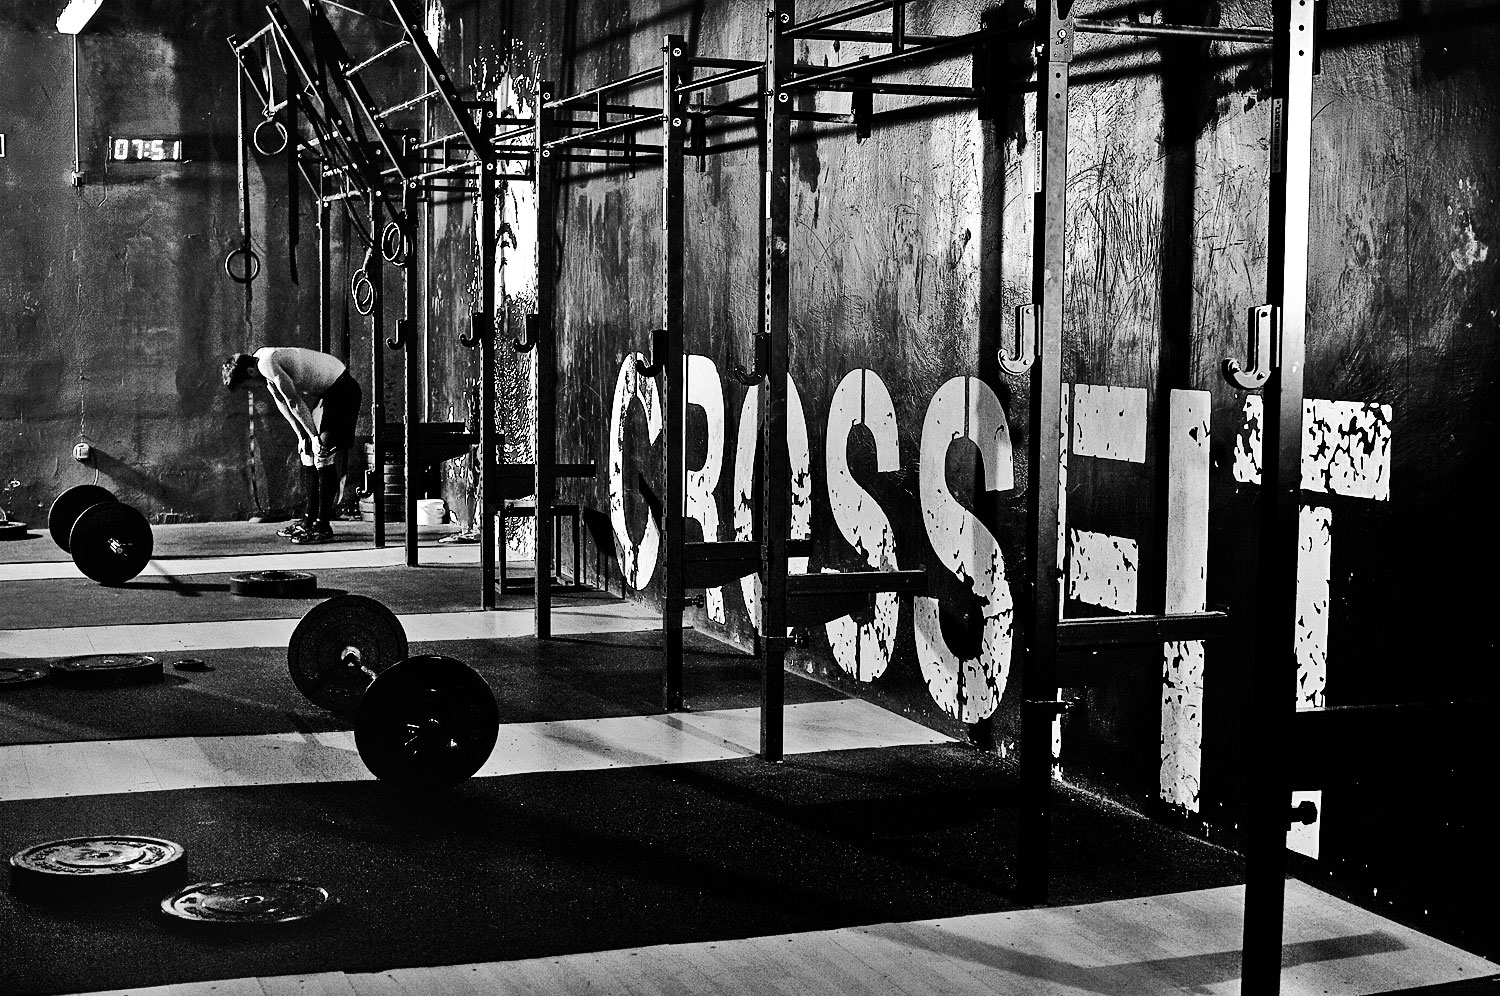 Crossfit backgrounds